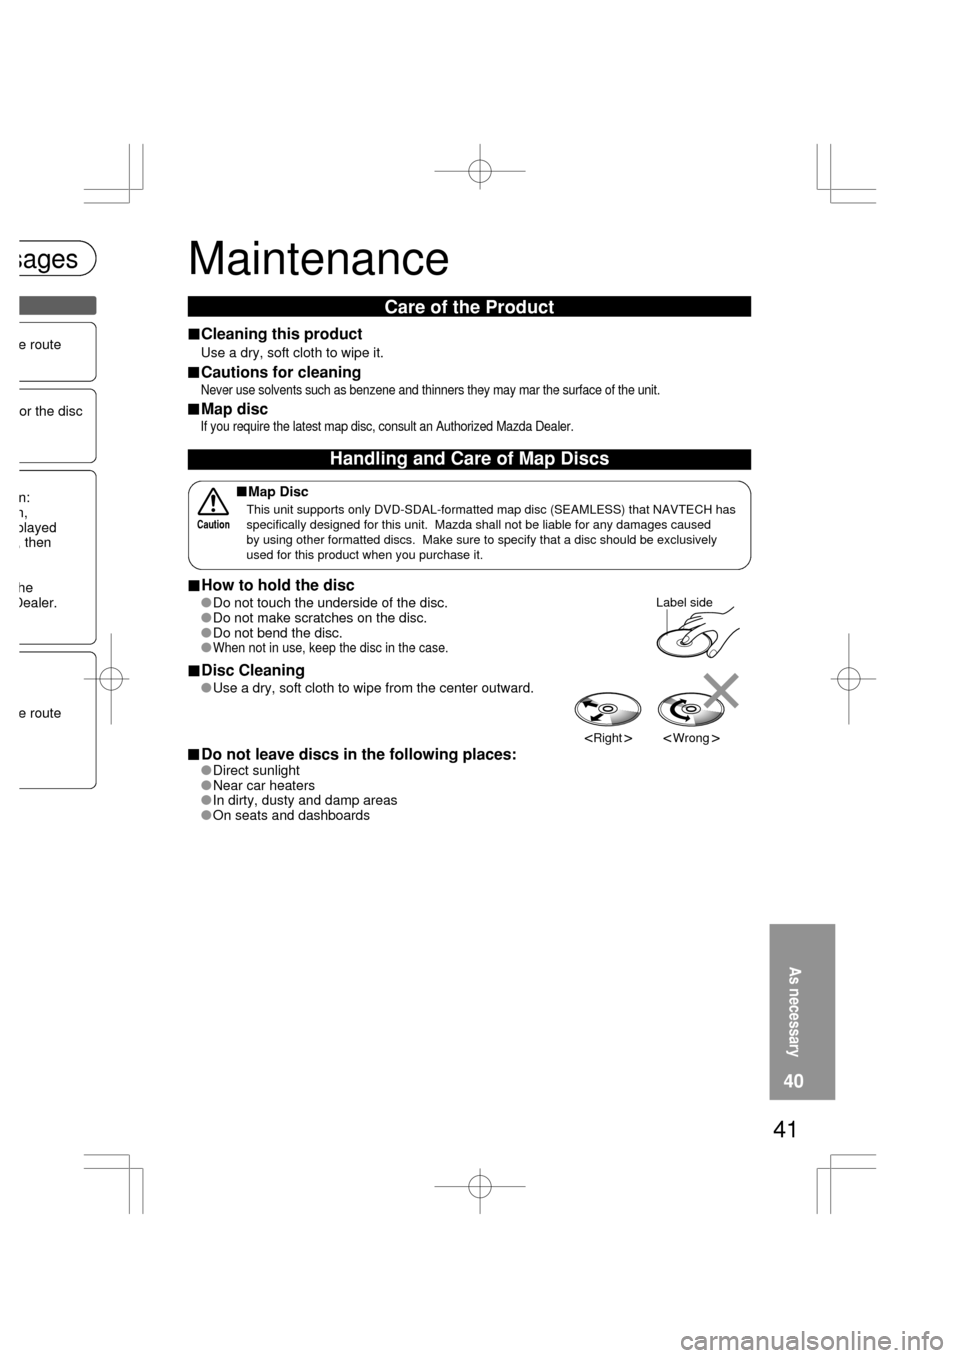 MAZDA MODEL RX 8 2004  Owners Manual (in English) 41
Maintenance
Care of the Product
Use a dry, soft cloth to wipe it.
Cleaning this product
Never use solvents such as benzene and thinners they may mar the surface of the unit.
Cautions for cleaning